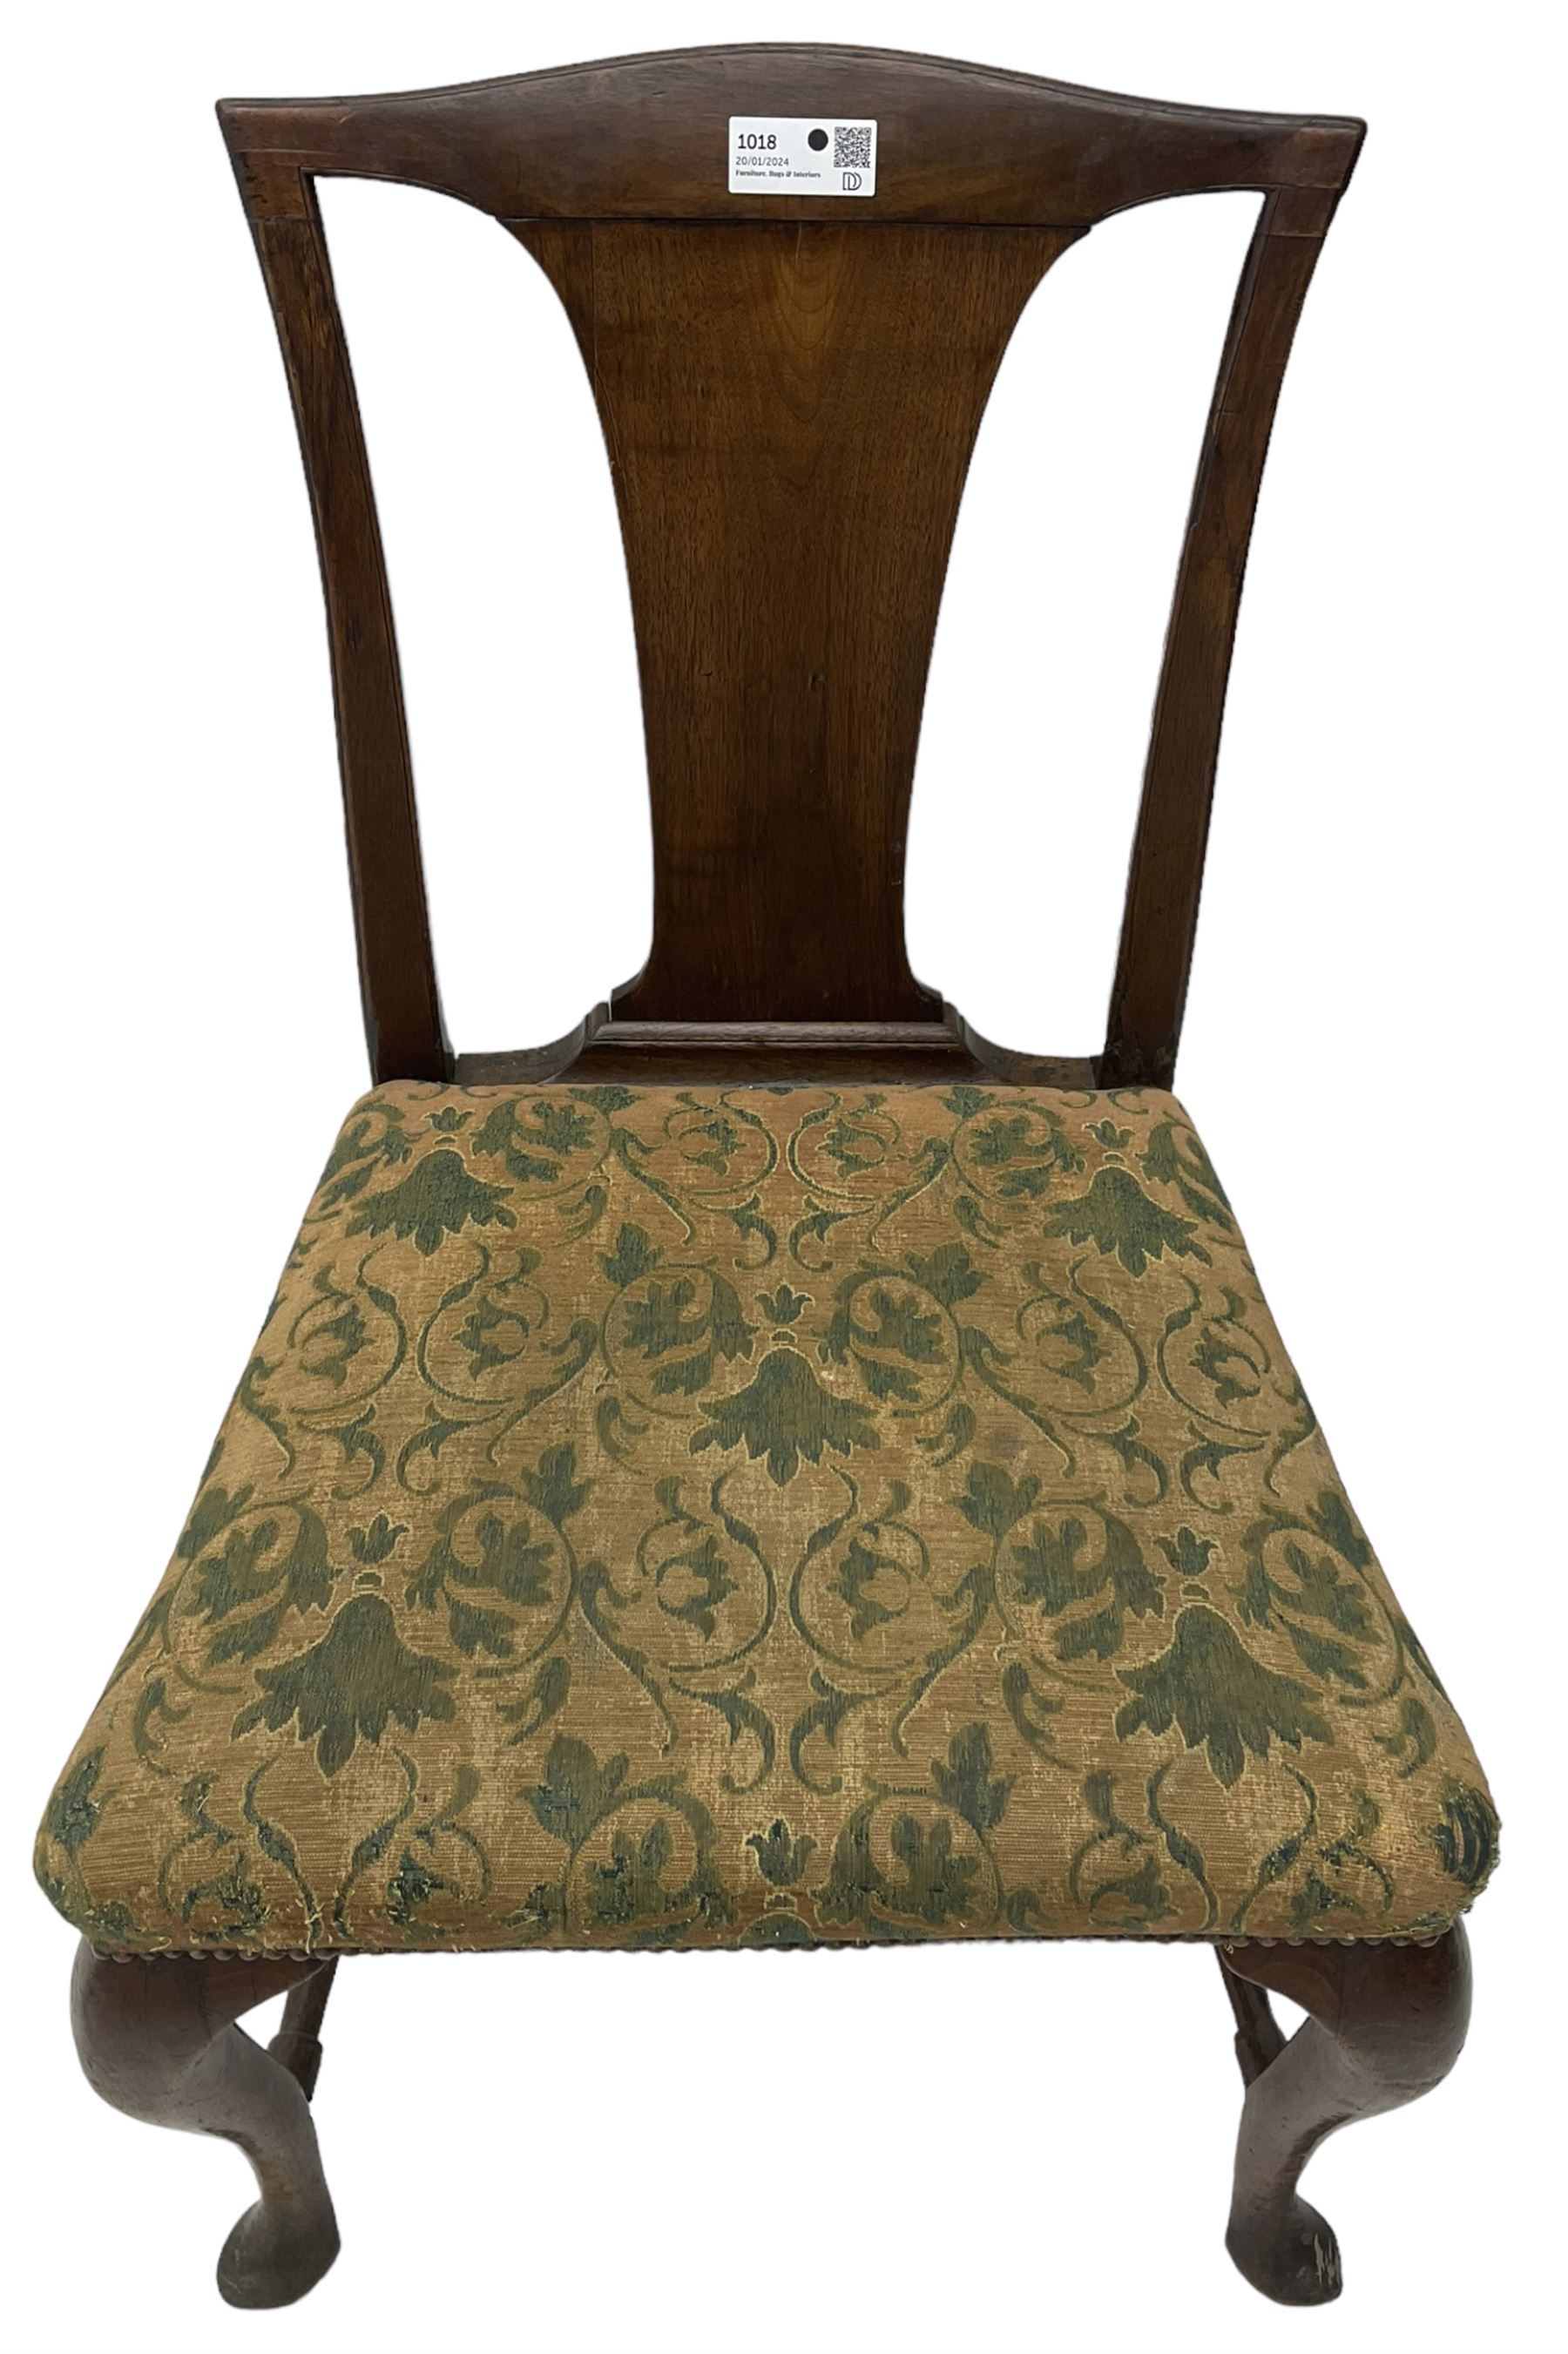 Mid-18th century mahogany side chair - Image 3 of 6